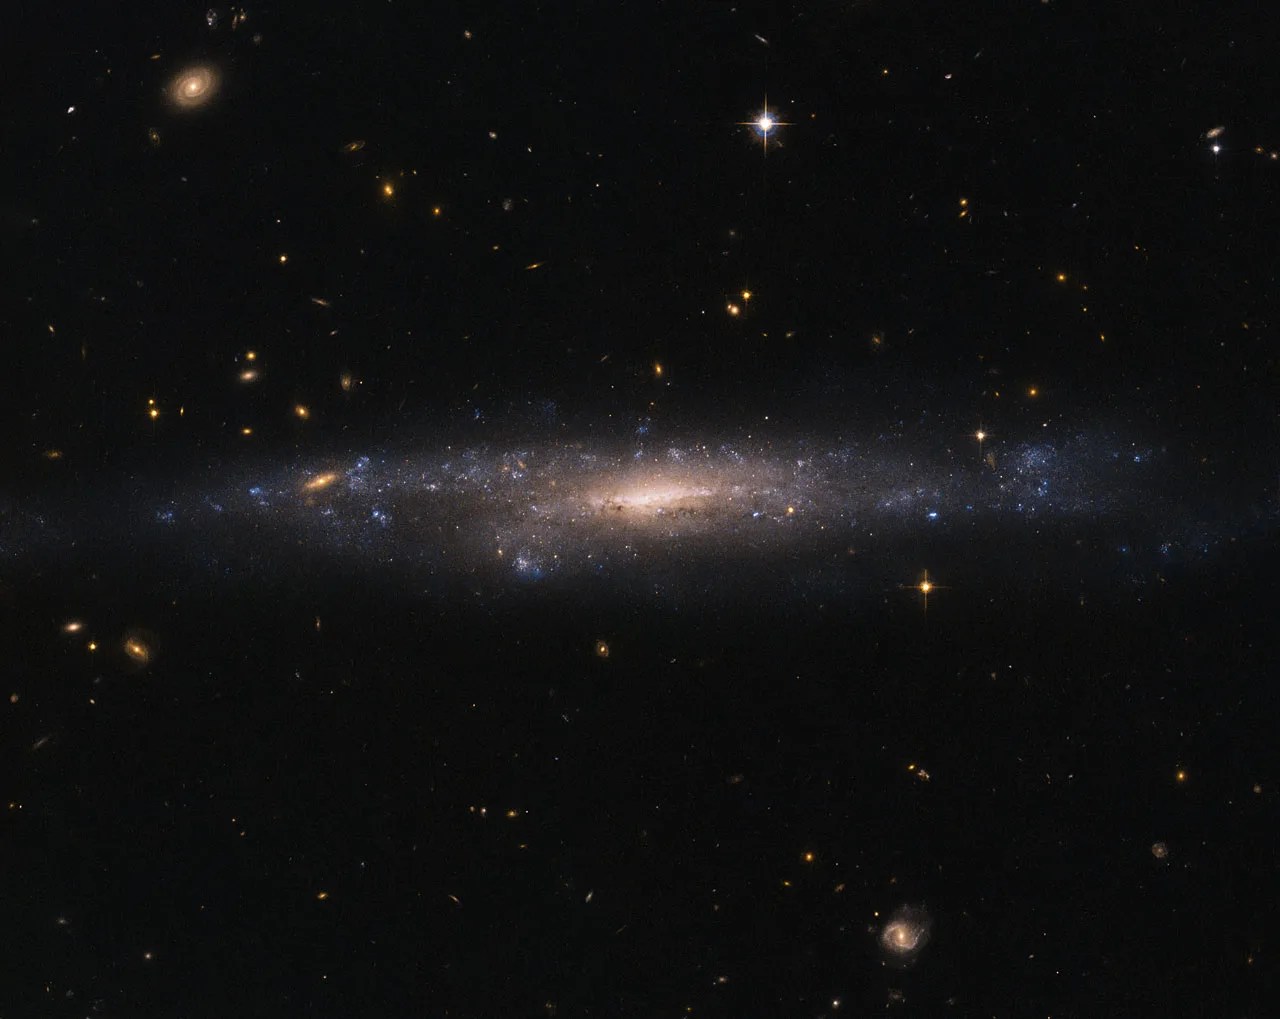 A galaxy is seen almost edge-on, with a bright orange-yellow core surrounded by patchy violet regions of star formation. The rest of the image is dotted with distant stars and galaxies against black space.